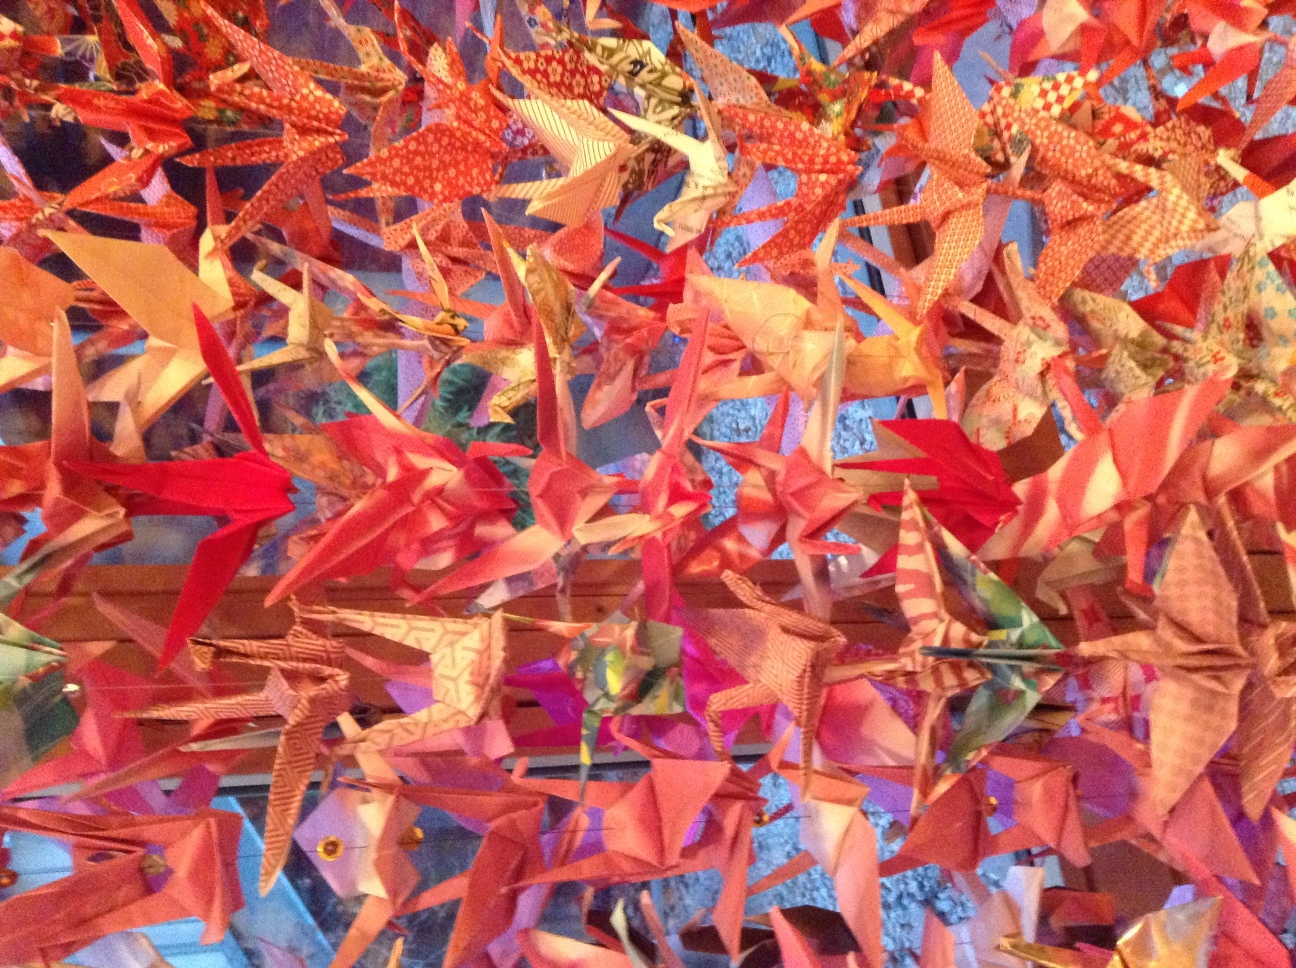 3500 paper cranes for hope inside the Smith Center for Healing. Photo: Amy Wu